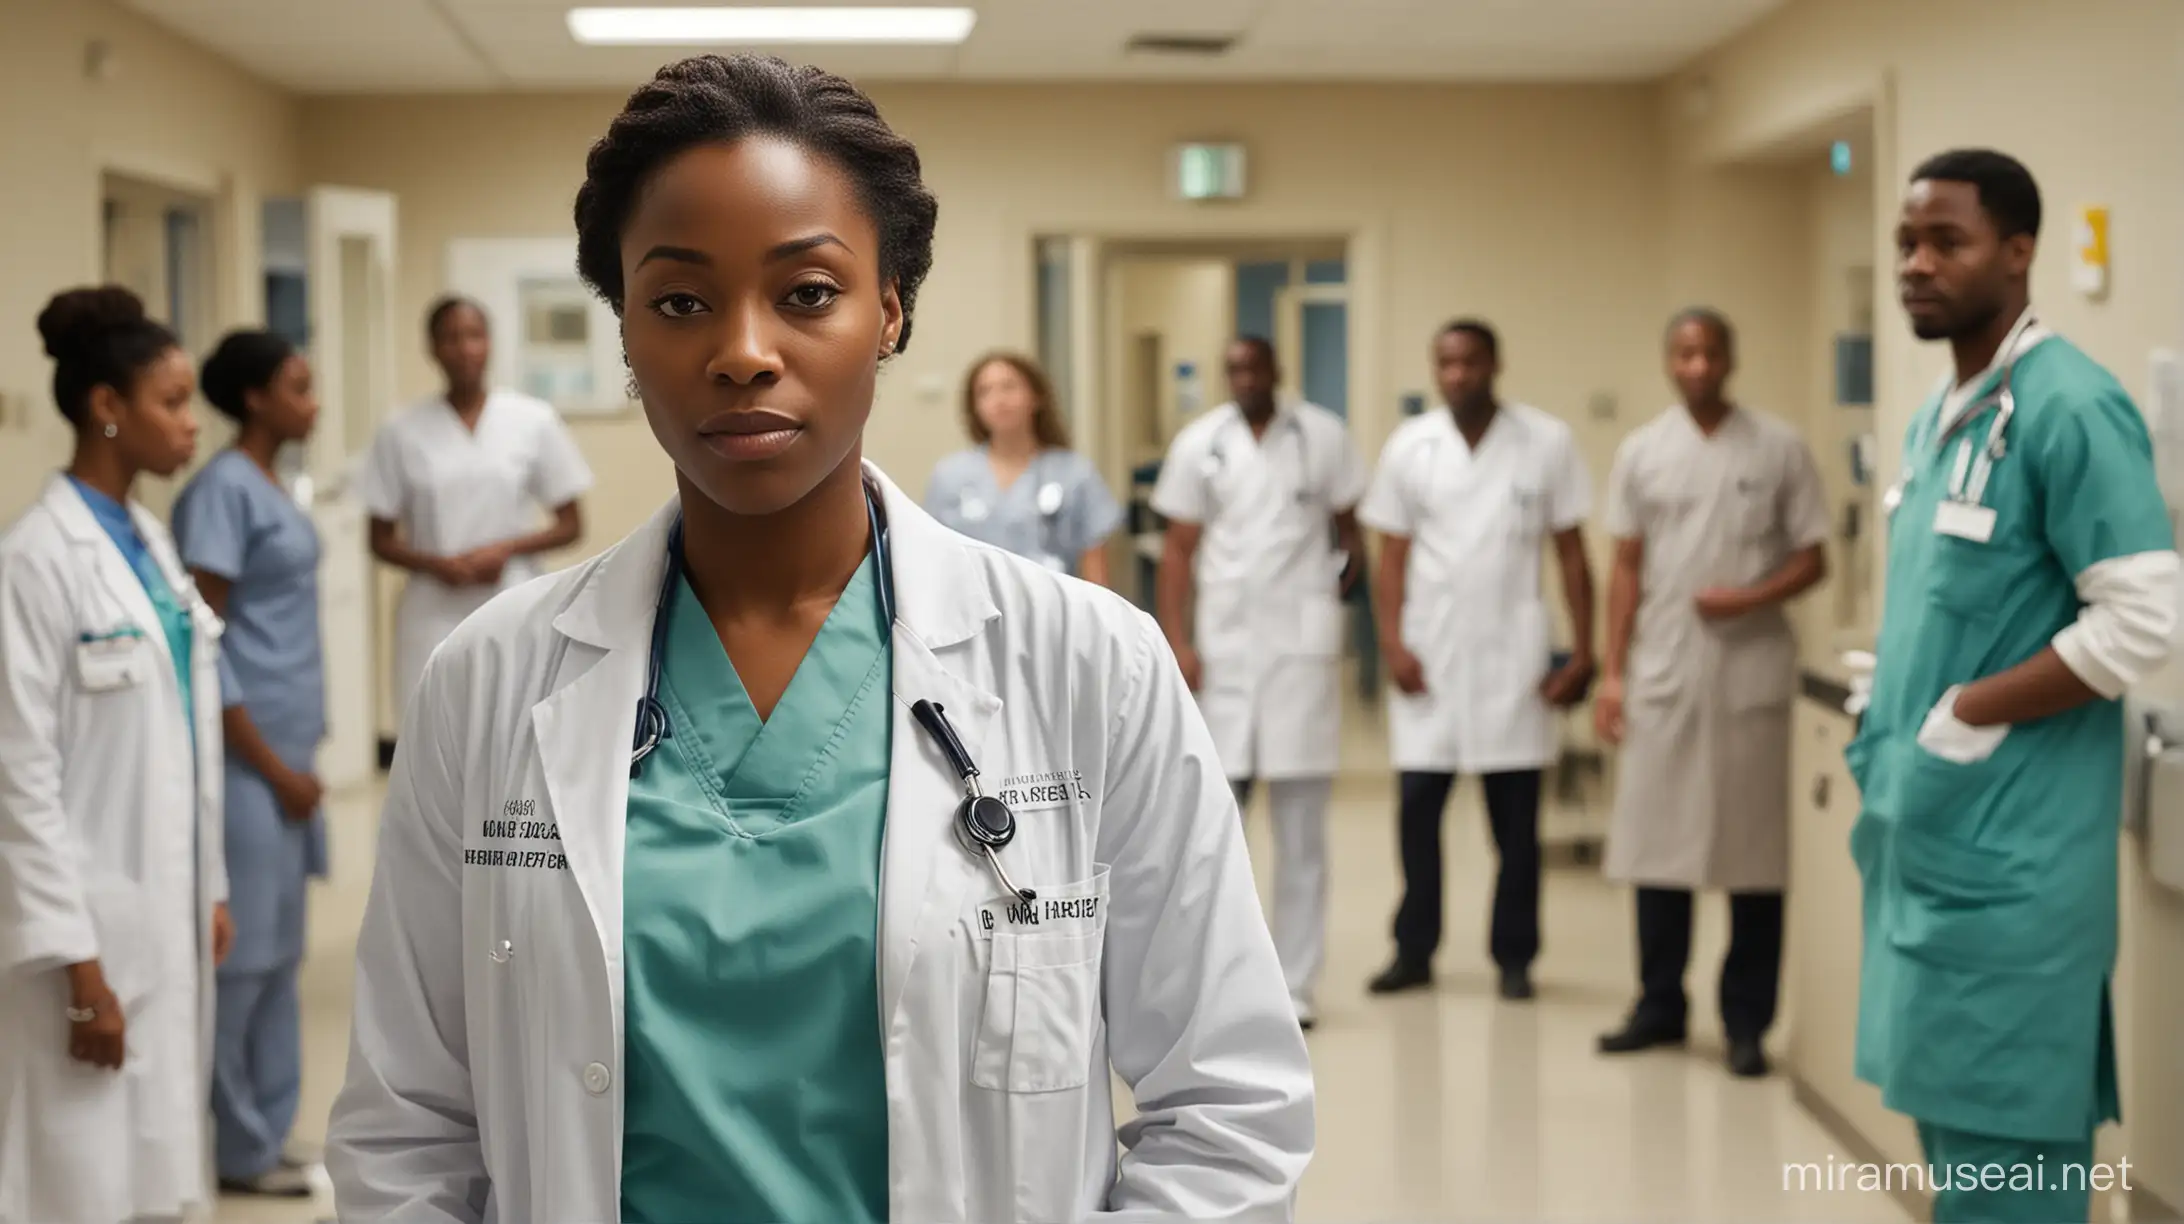 Confident African American Doctor Leading Amidst Hospital Chaos